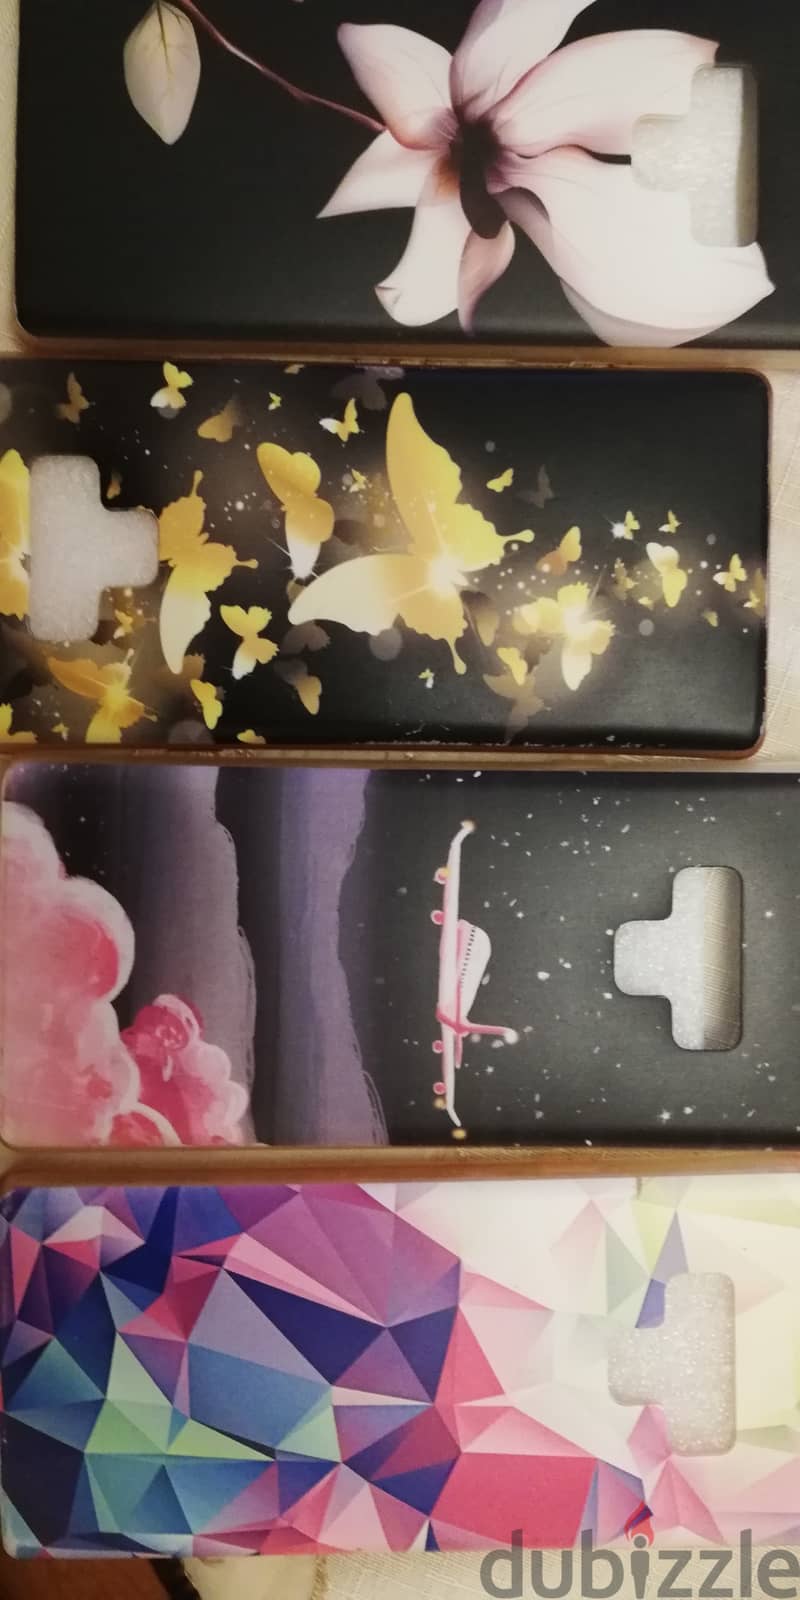 original phone covers note 9 price reduced 9